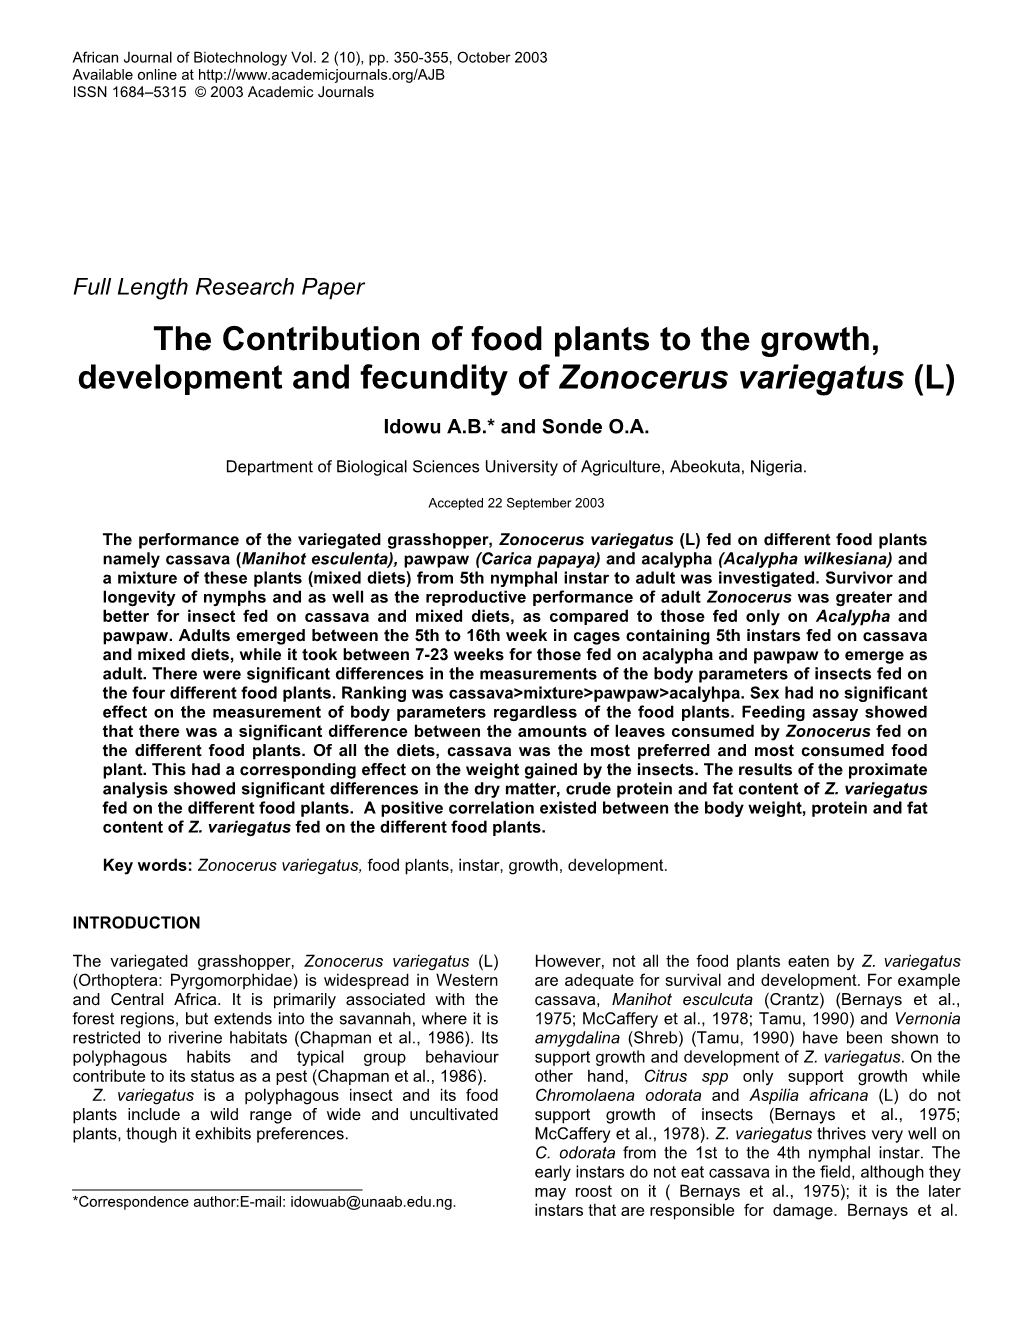 The Contribution of Food Plants to the Growth, Development and Fecundity of Zonocerus Variegatus (L)